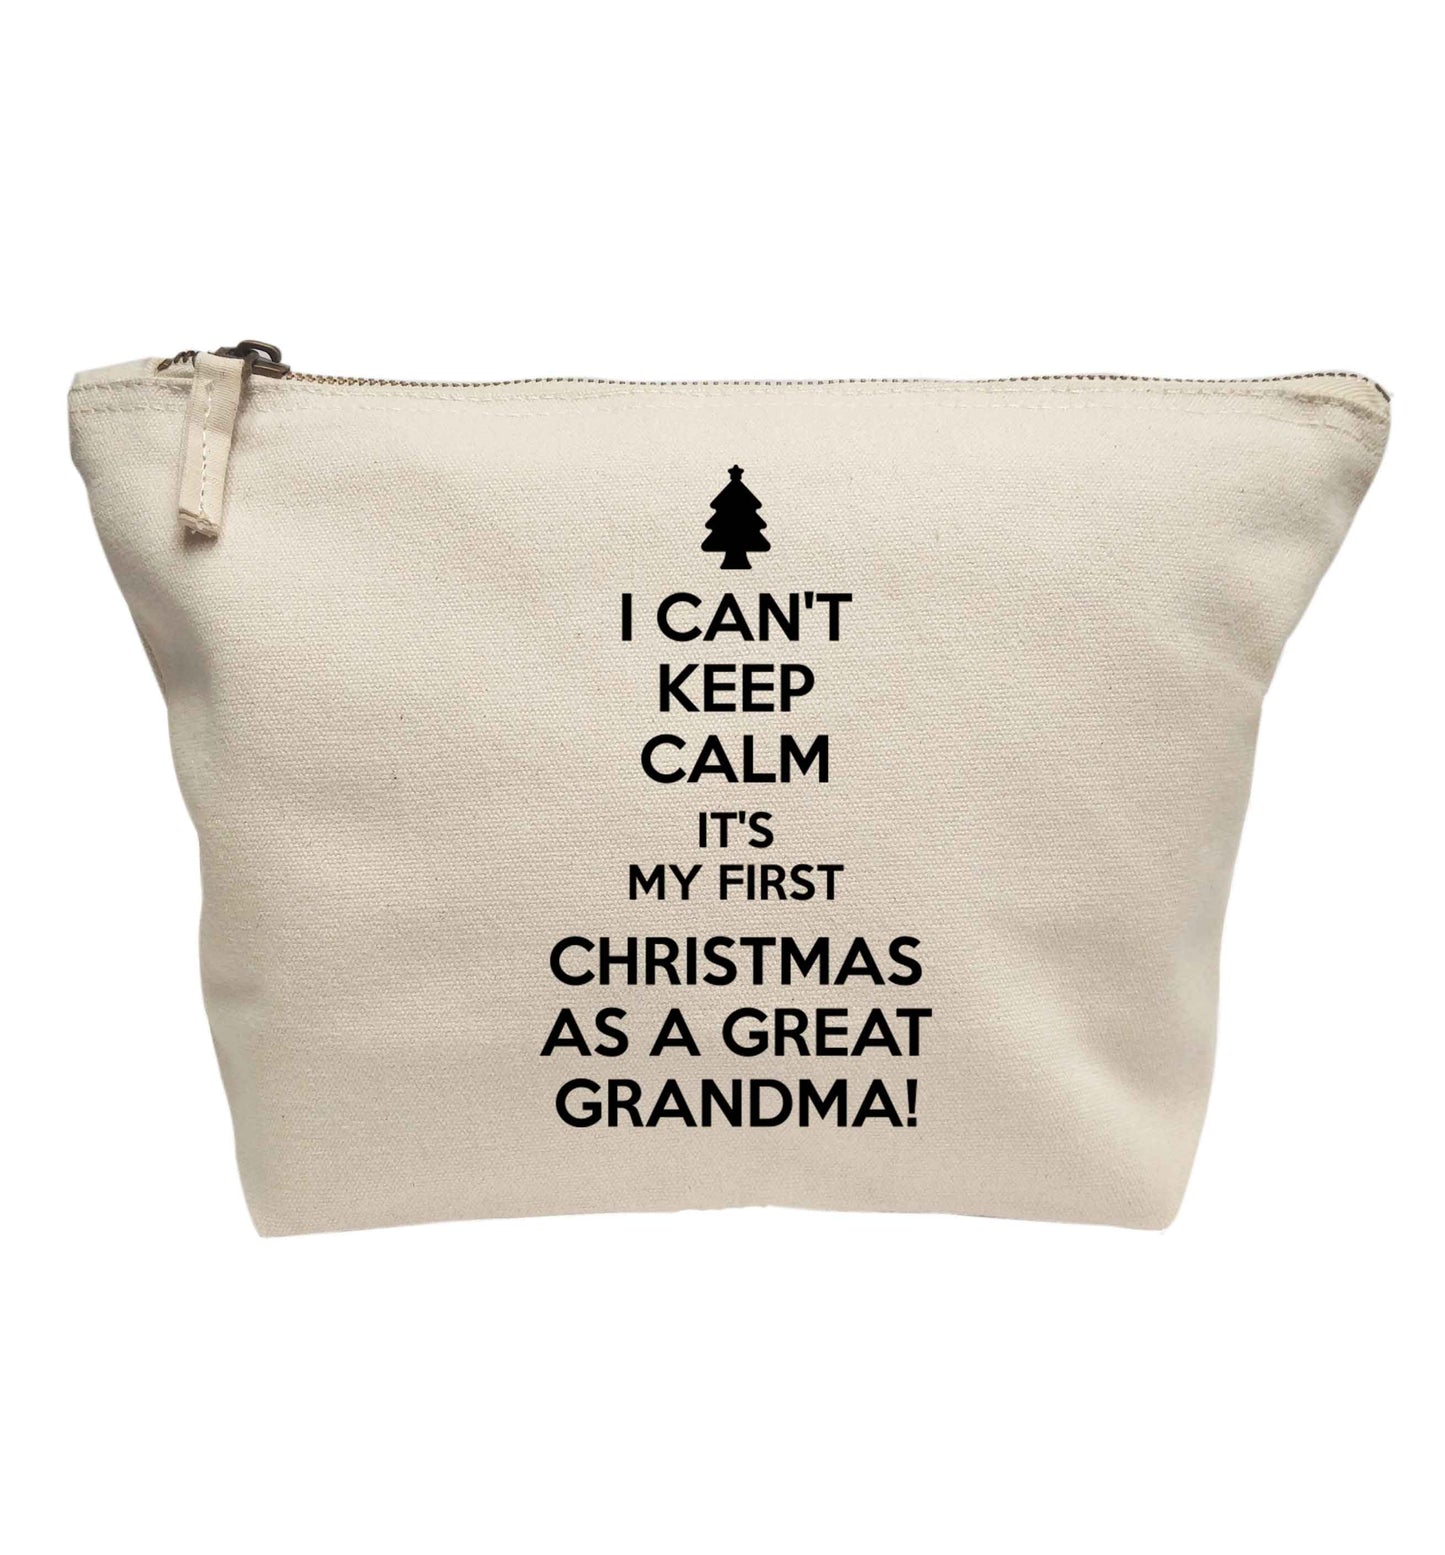 I can't keep calm it's my first Christmas as a great grandma! | makeup / wash bag